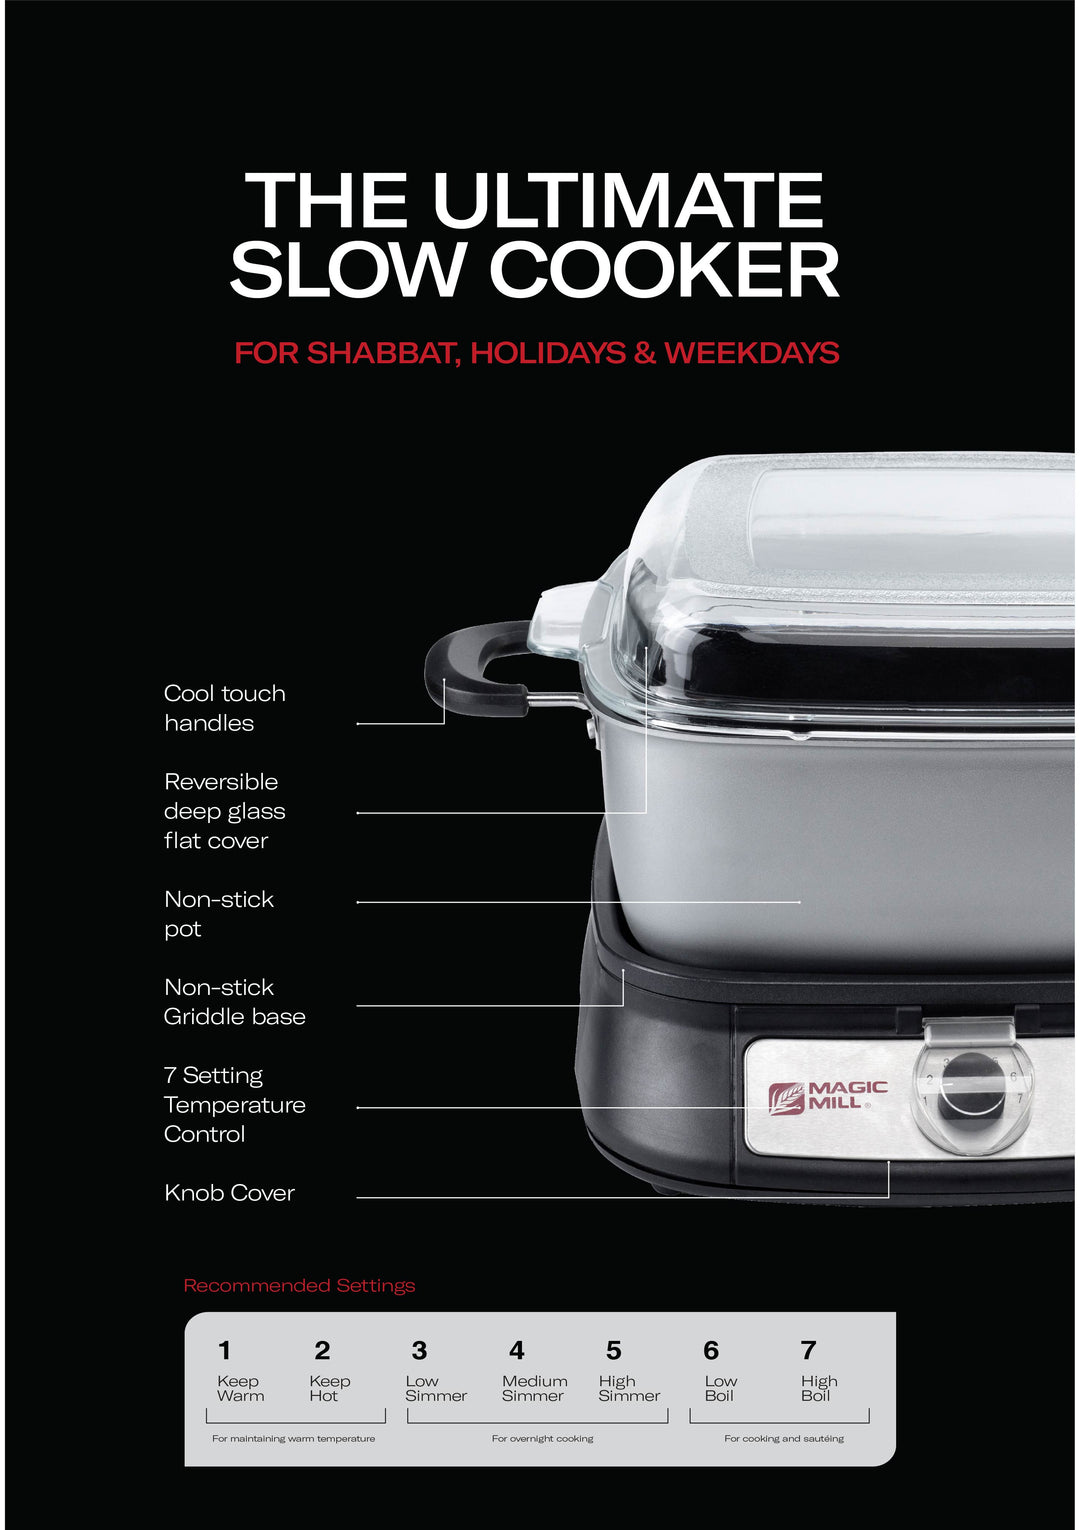 MAGIC MILL DELUXE 10 QT GRAY SLOW COOKER WITH FLAT GLASS COVER AND COOL TOUCH HANDLES MODEL# MSC1042